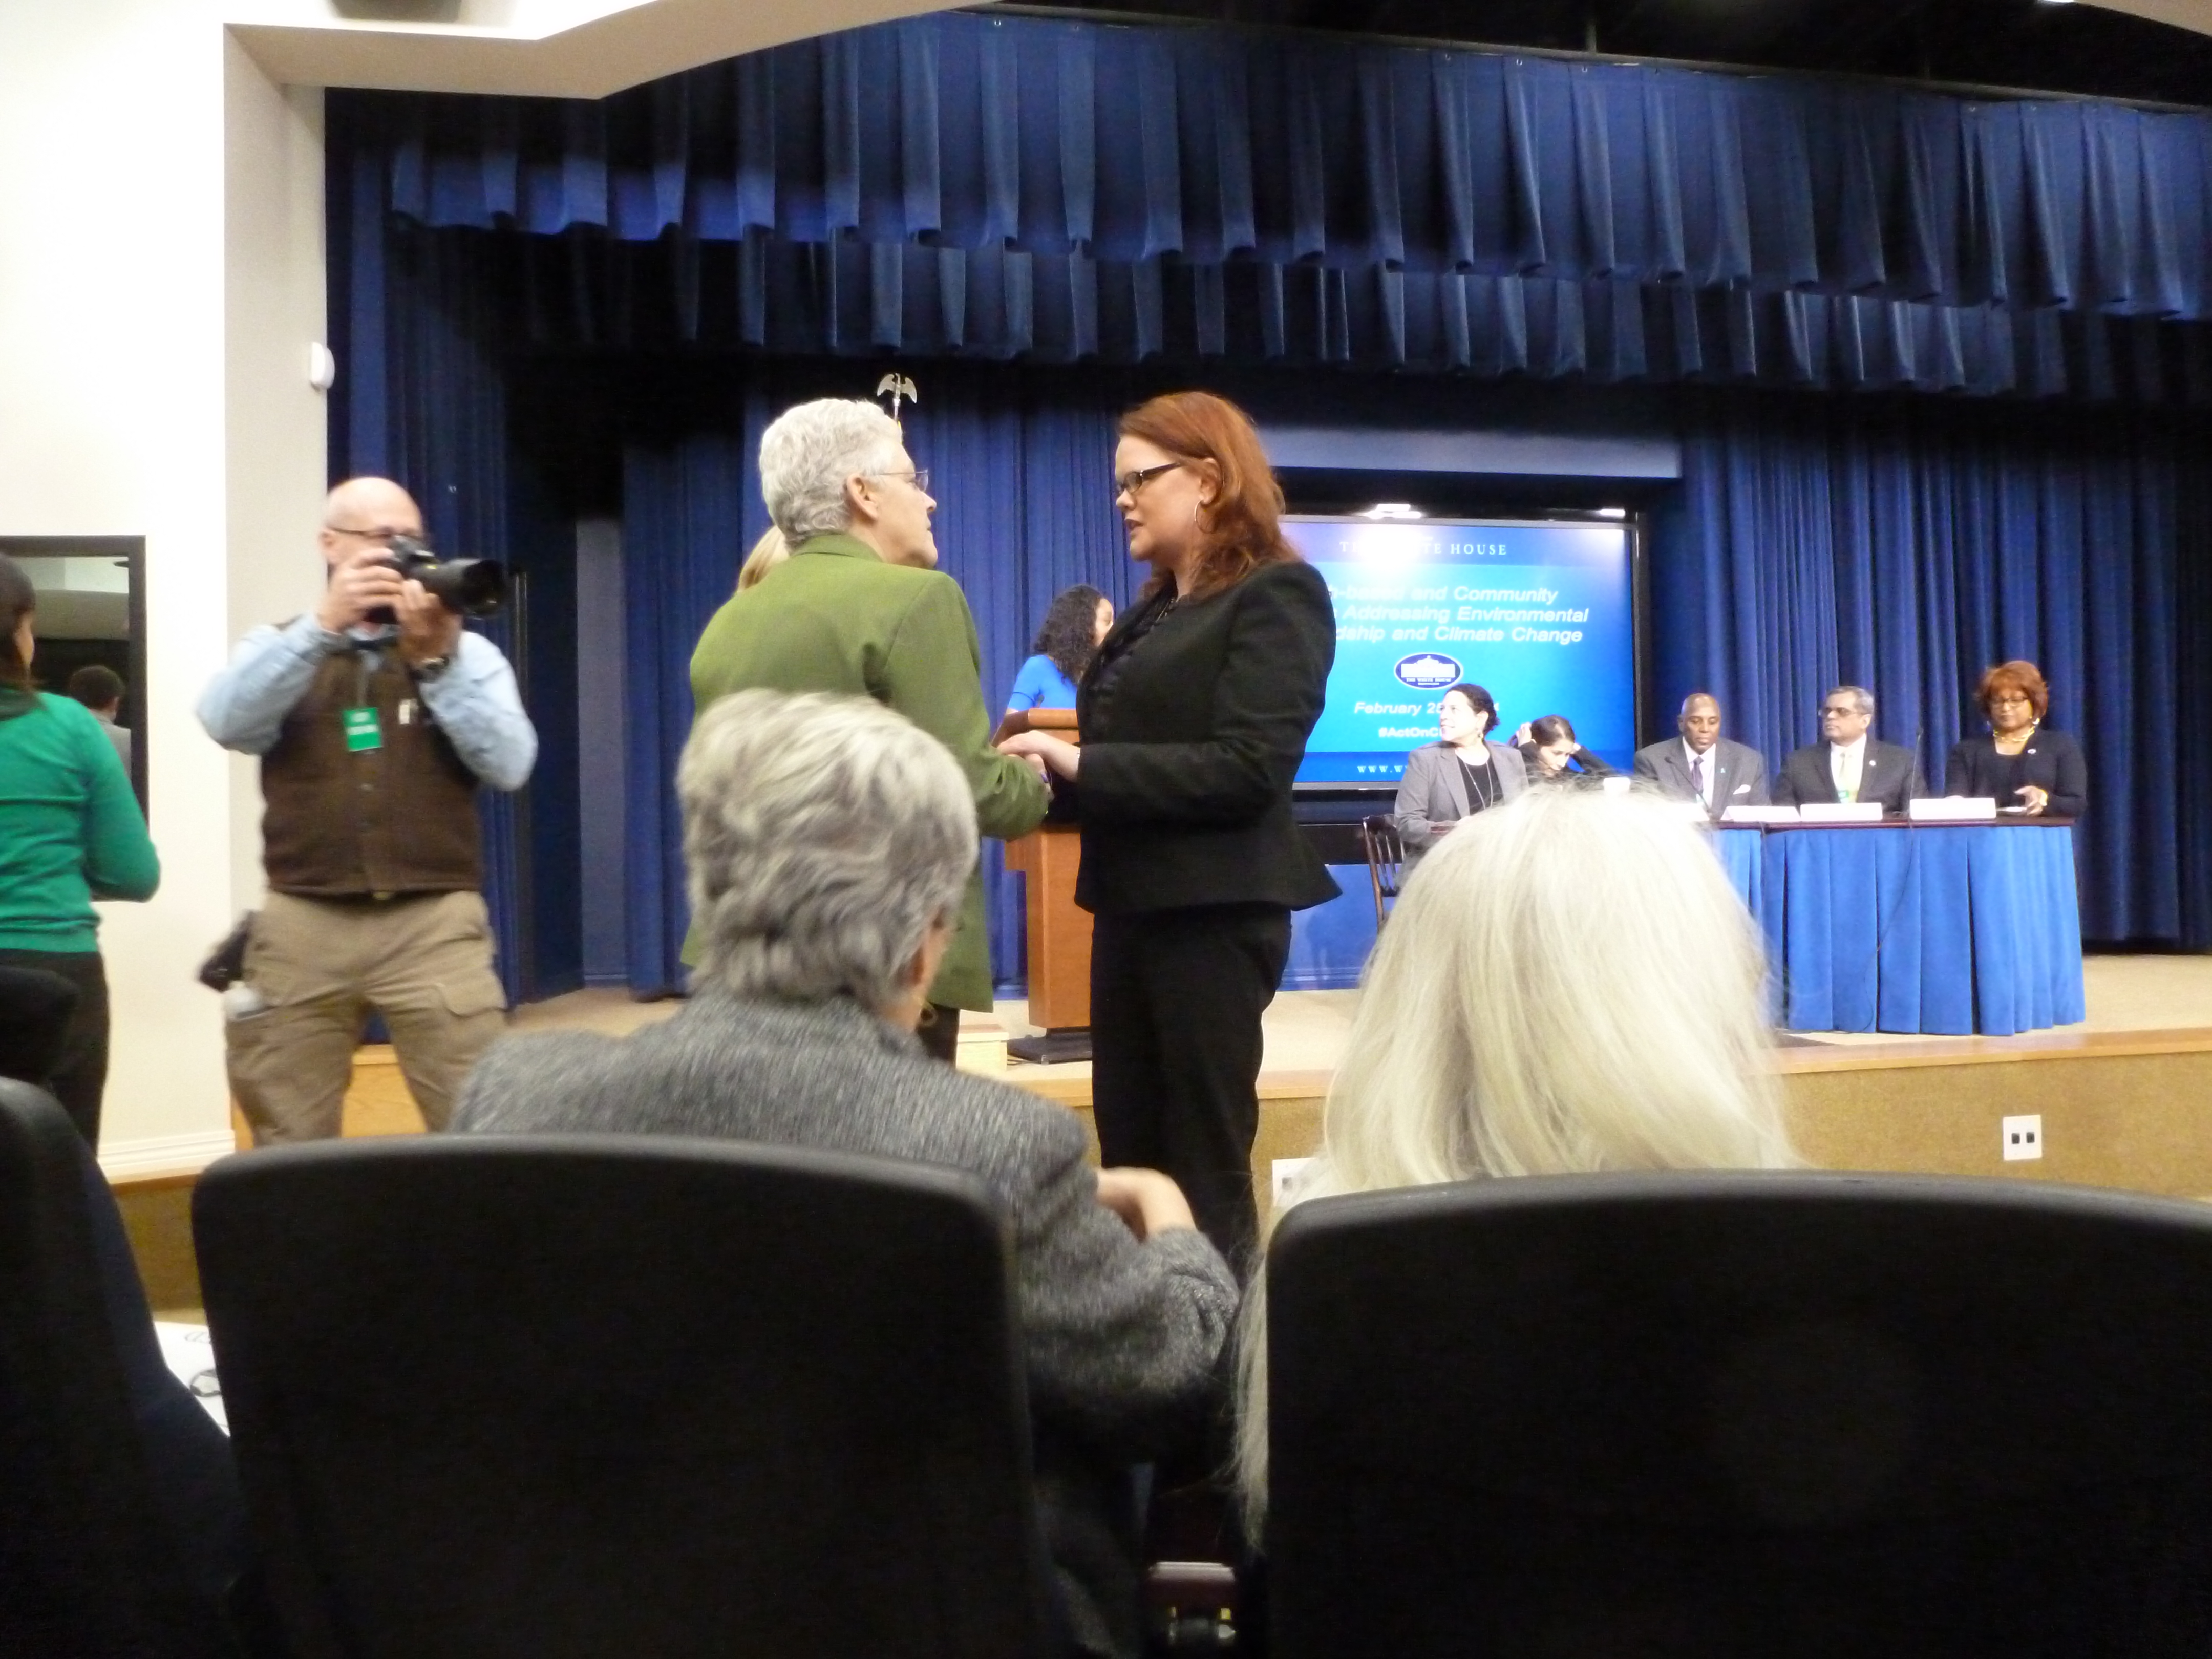 EPA Administrator Gina McCarty after her remarks, in green.